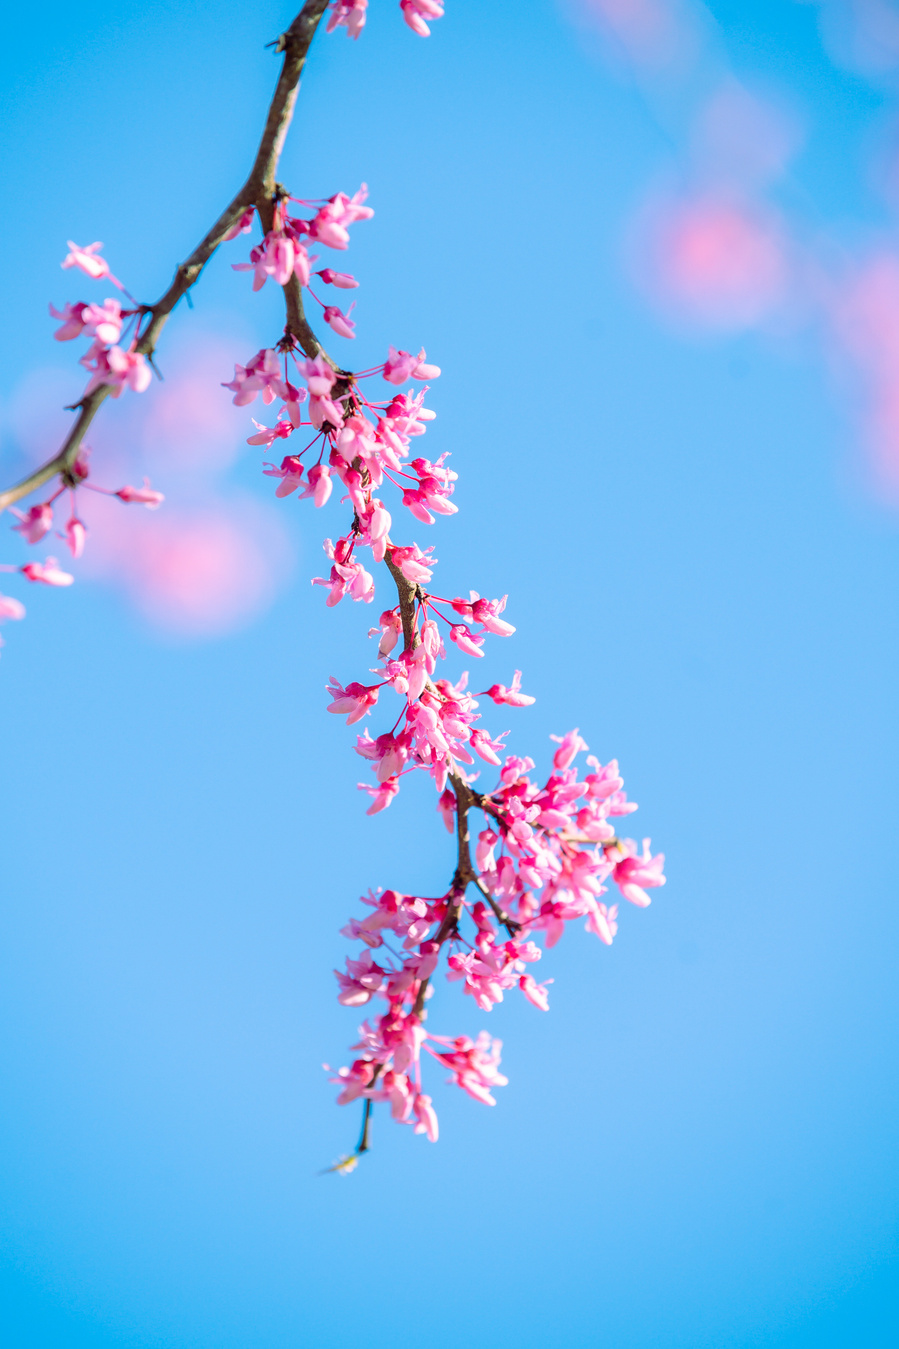 Cherry Blossom Print by Wandering.anhbao. Anh Bao Tran-Le Photography